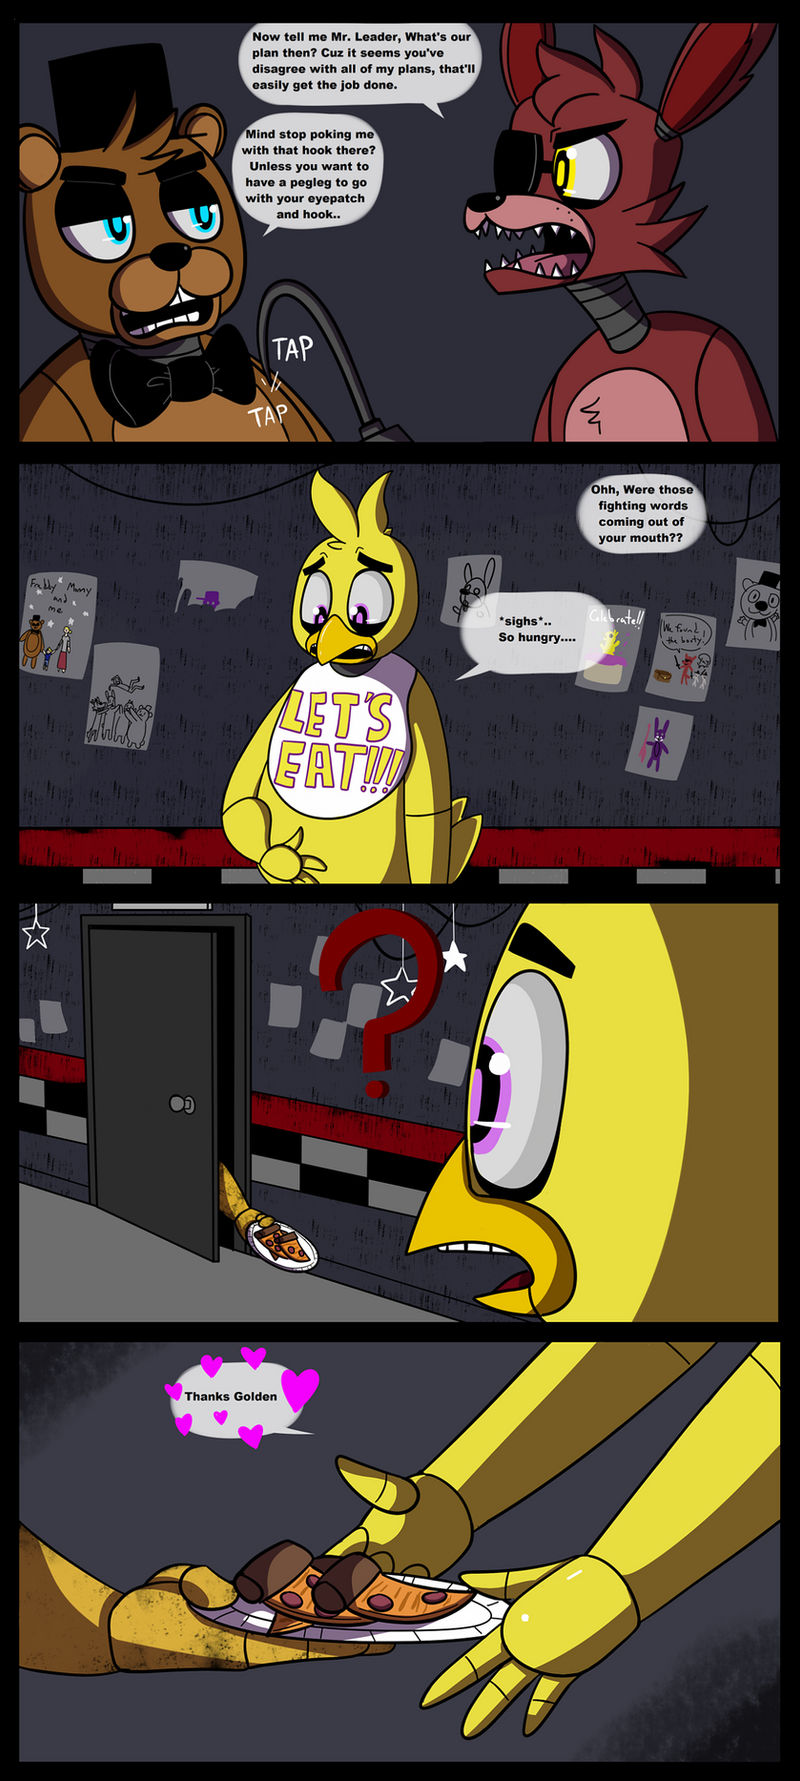 Five Nights At Freddy's 2 by Ambercatlucky2 on DeviantArt